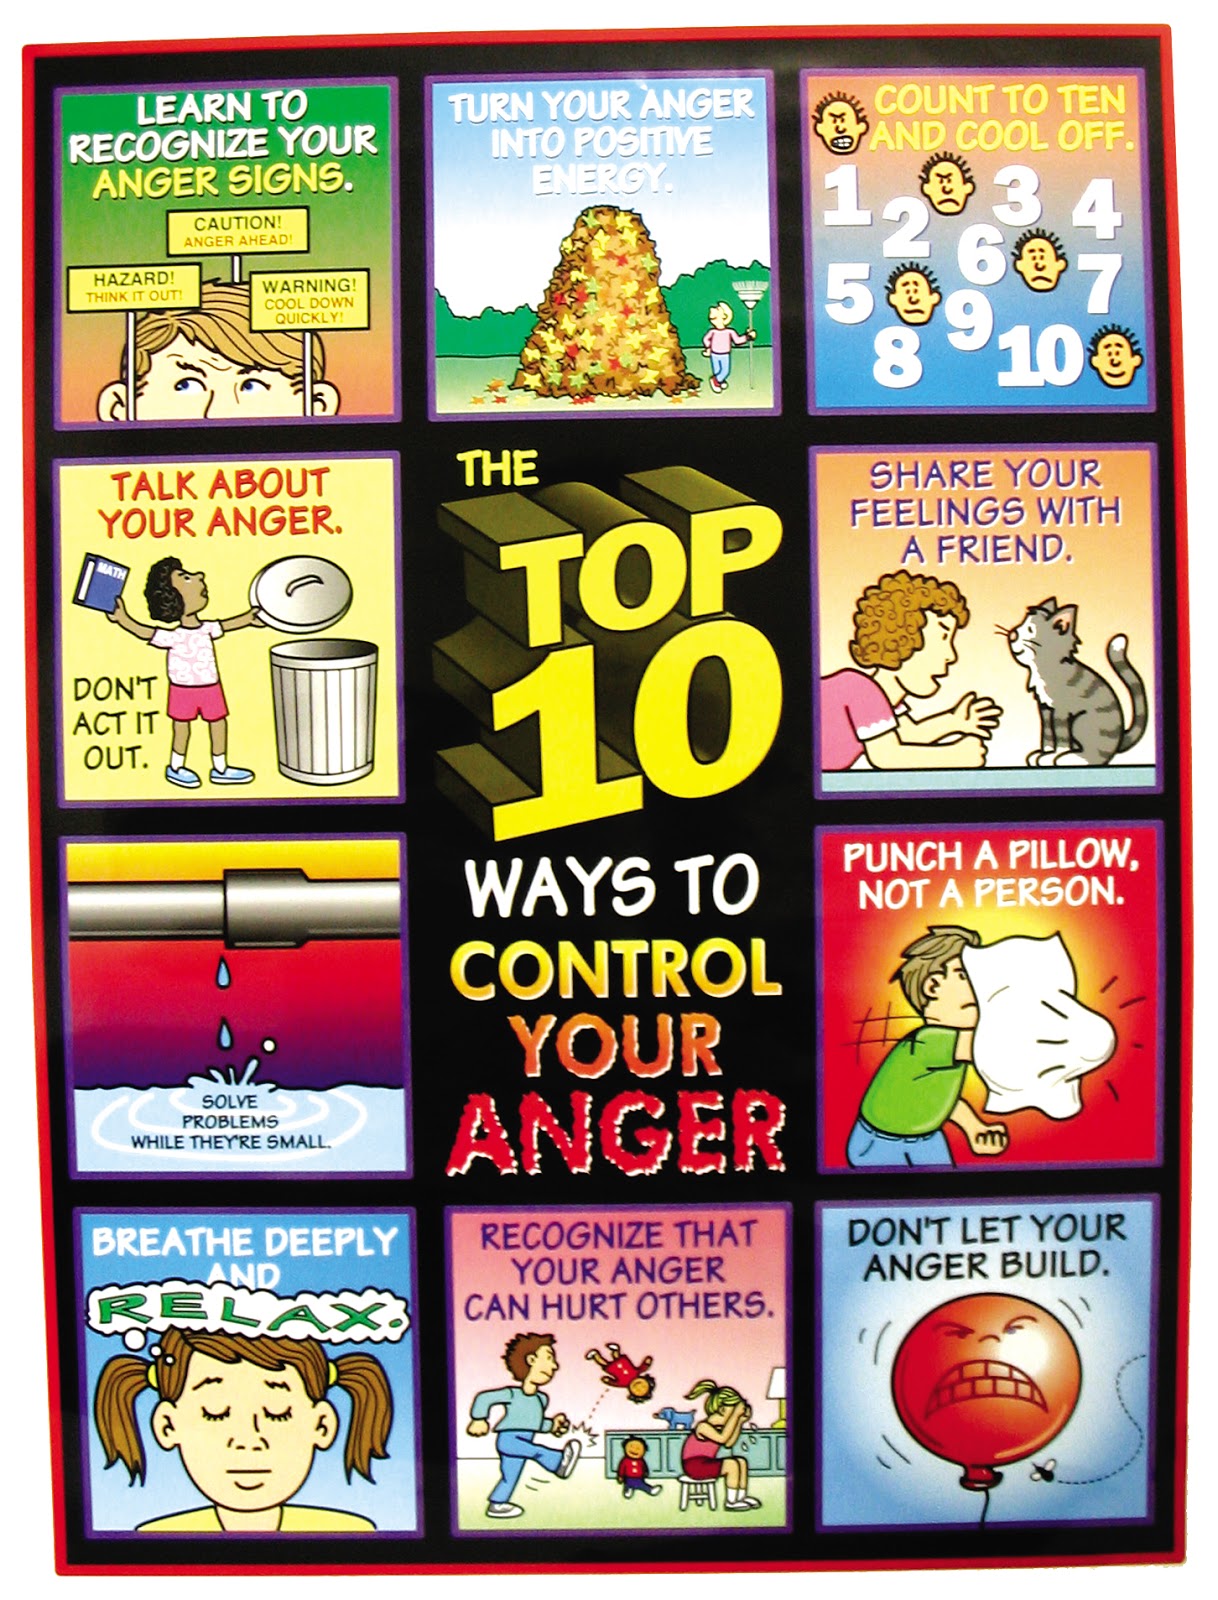 how to deal with anger management tips